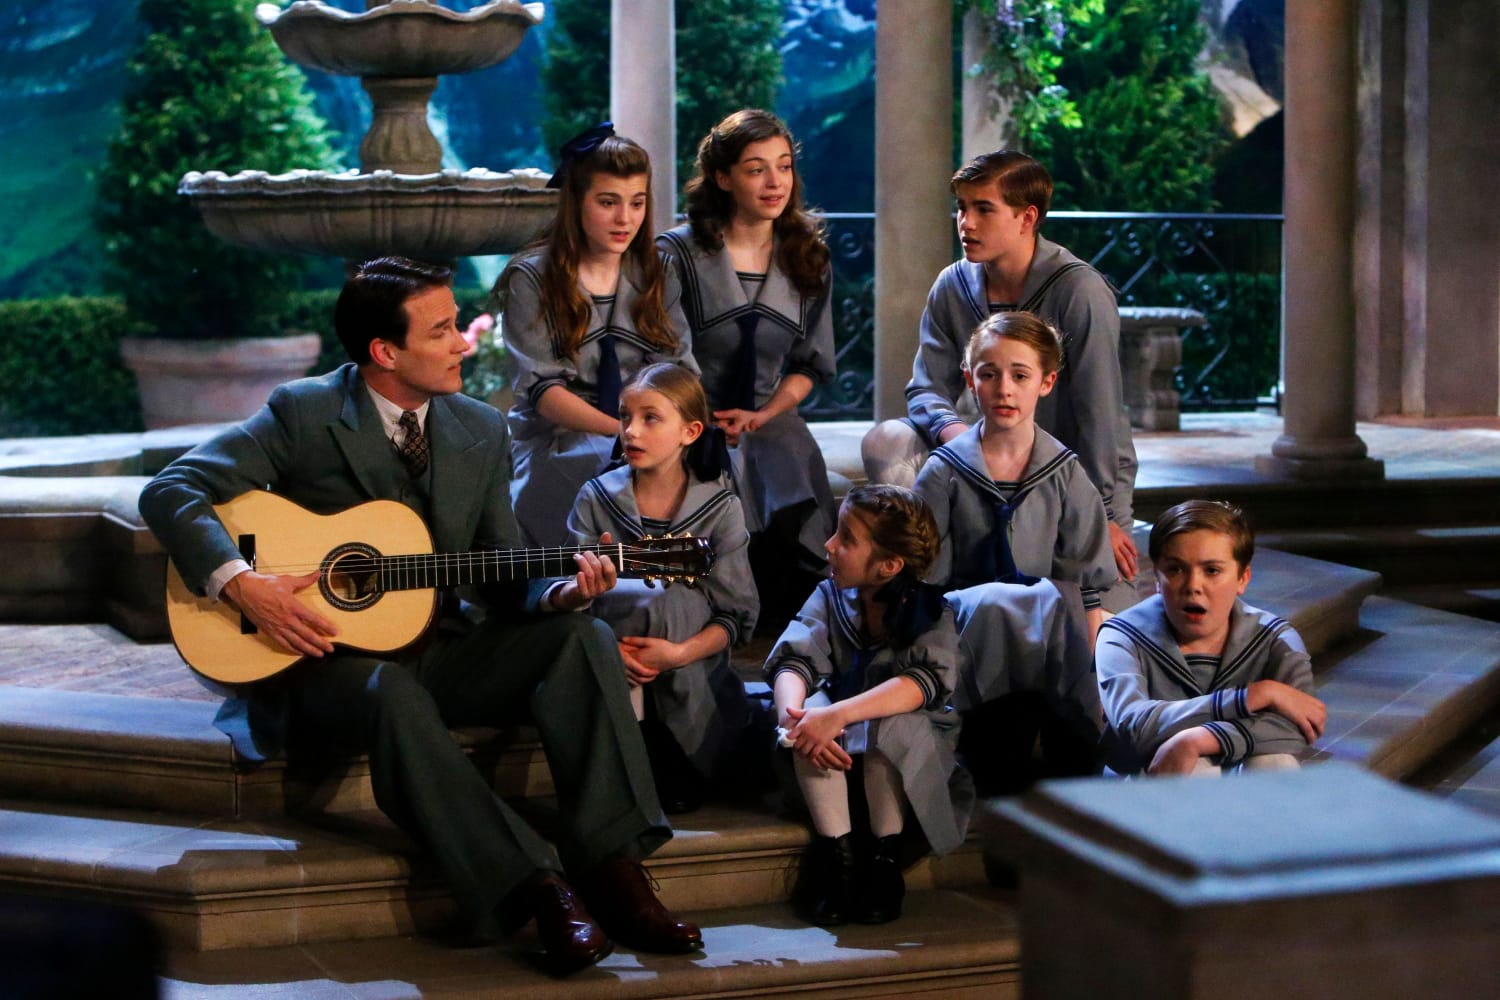 The Sound of Music makes its way to Indian television